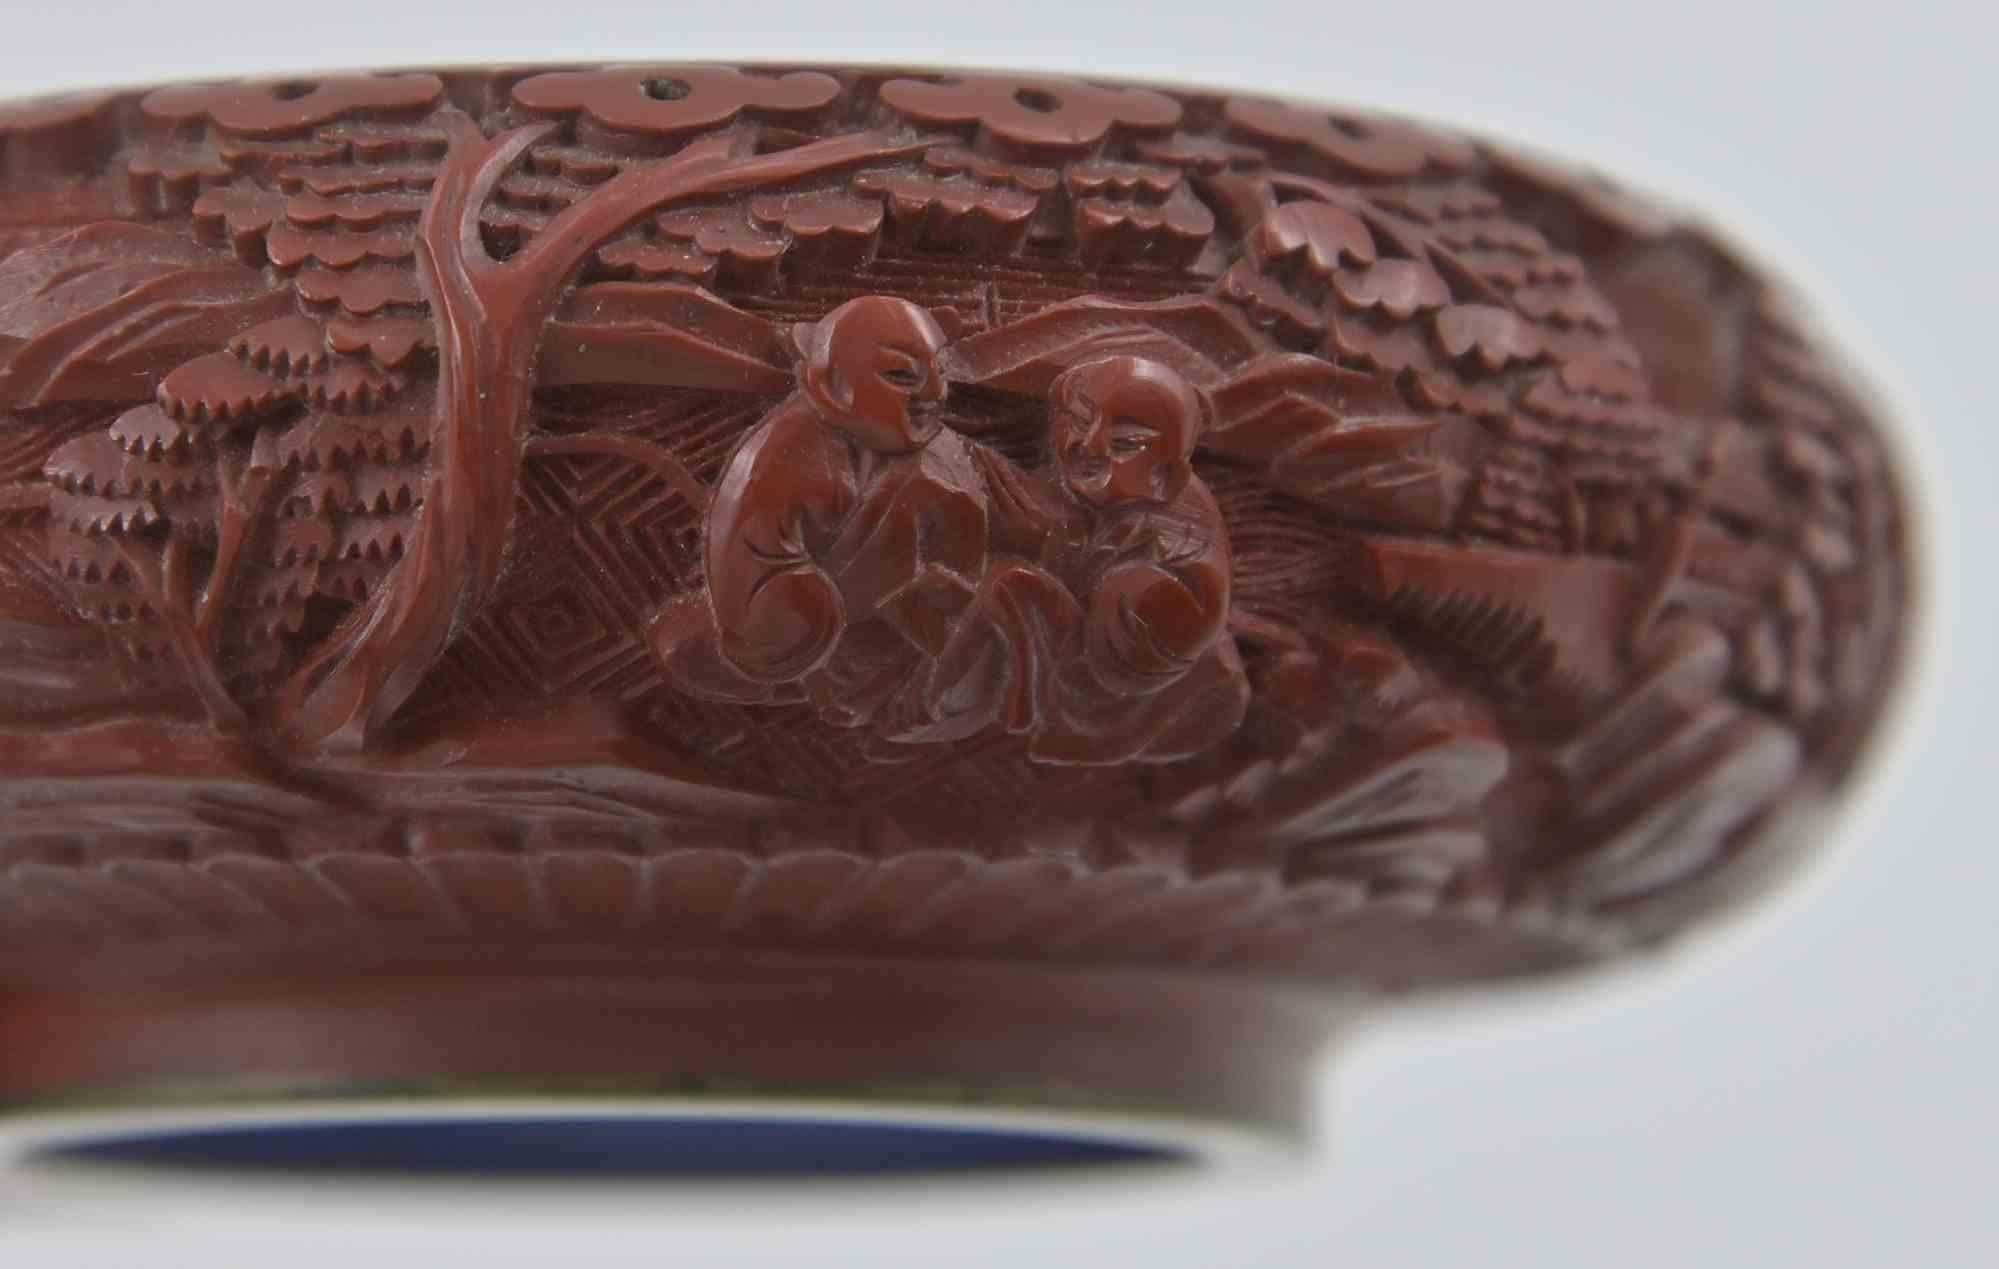 Vintage Chinese ashtray in sealing wax.

China Mid-20th Century. Glazed wood. 

Good conditions.